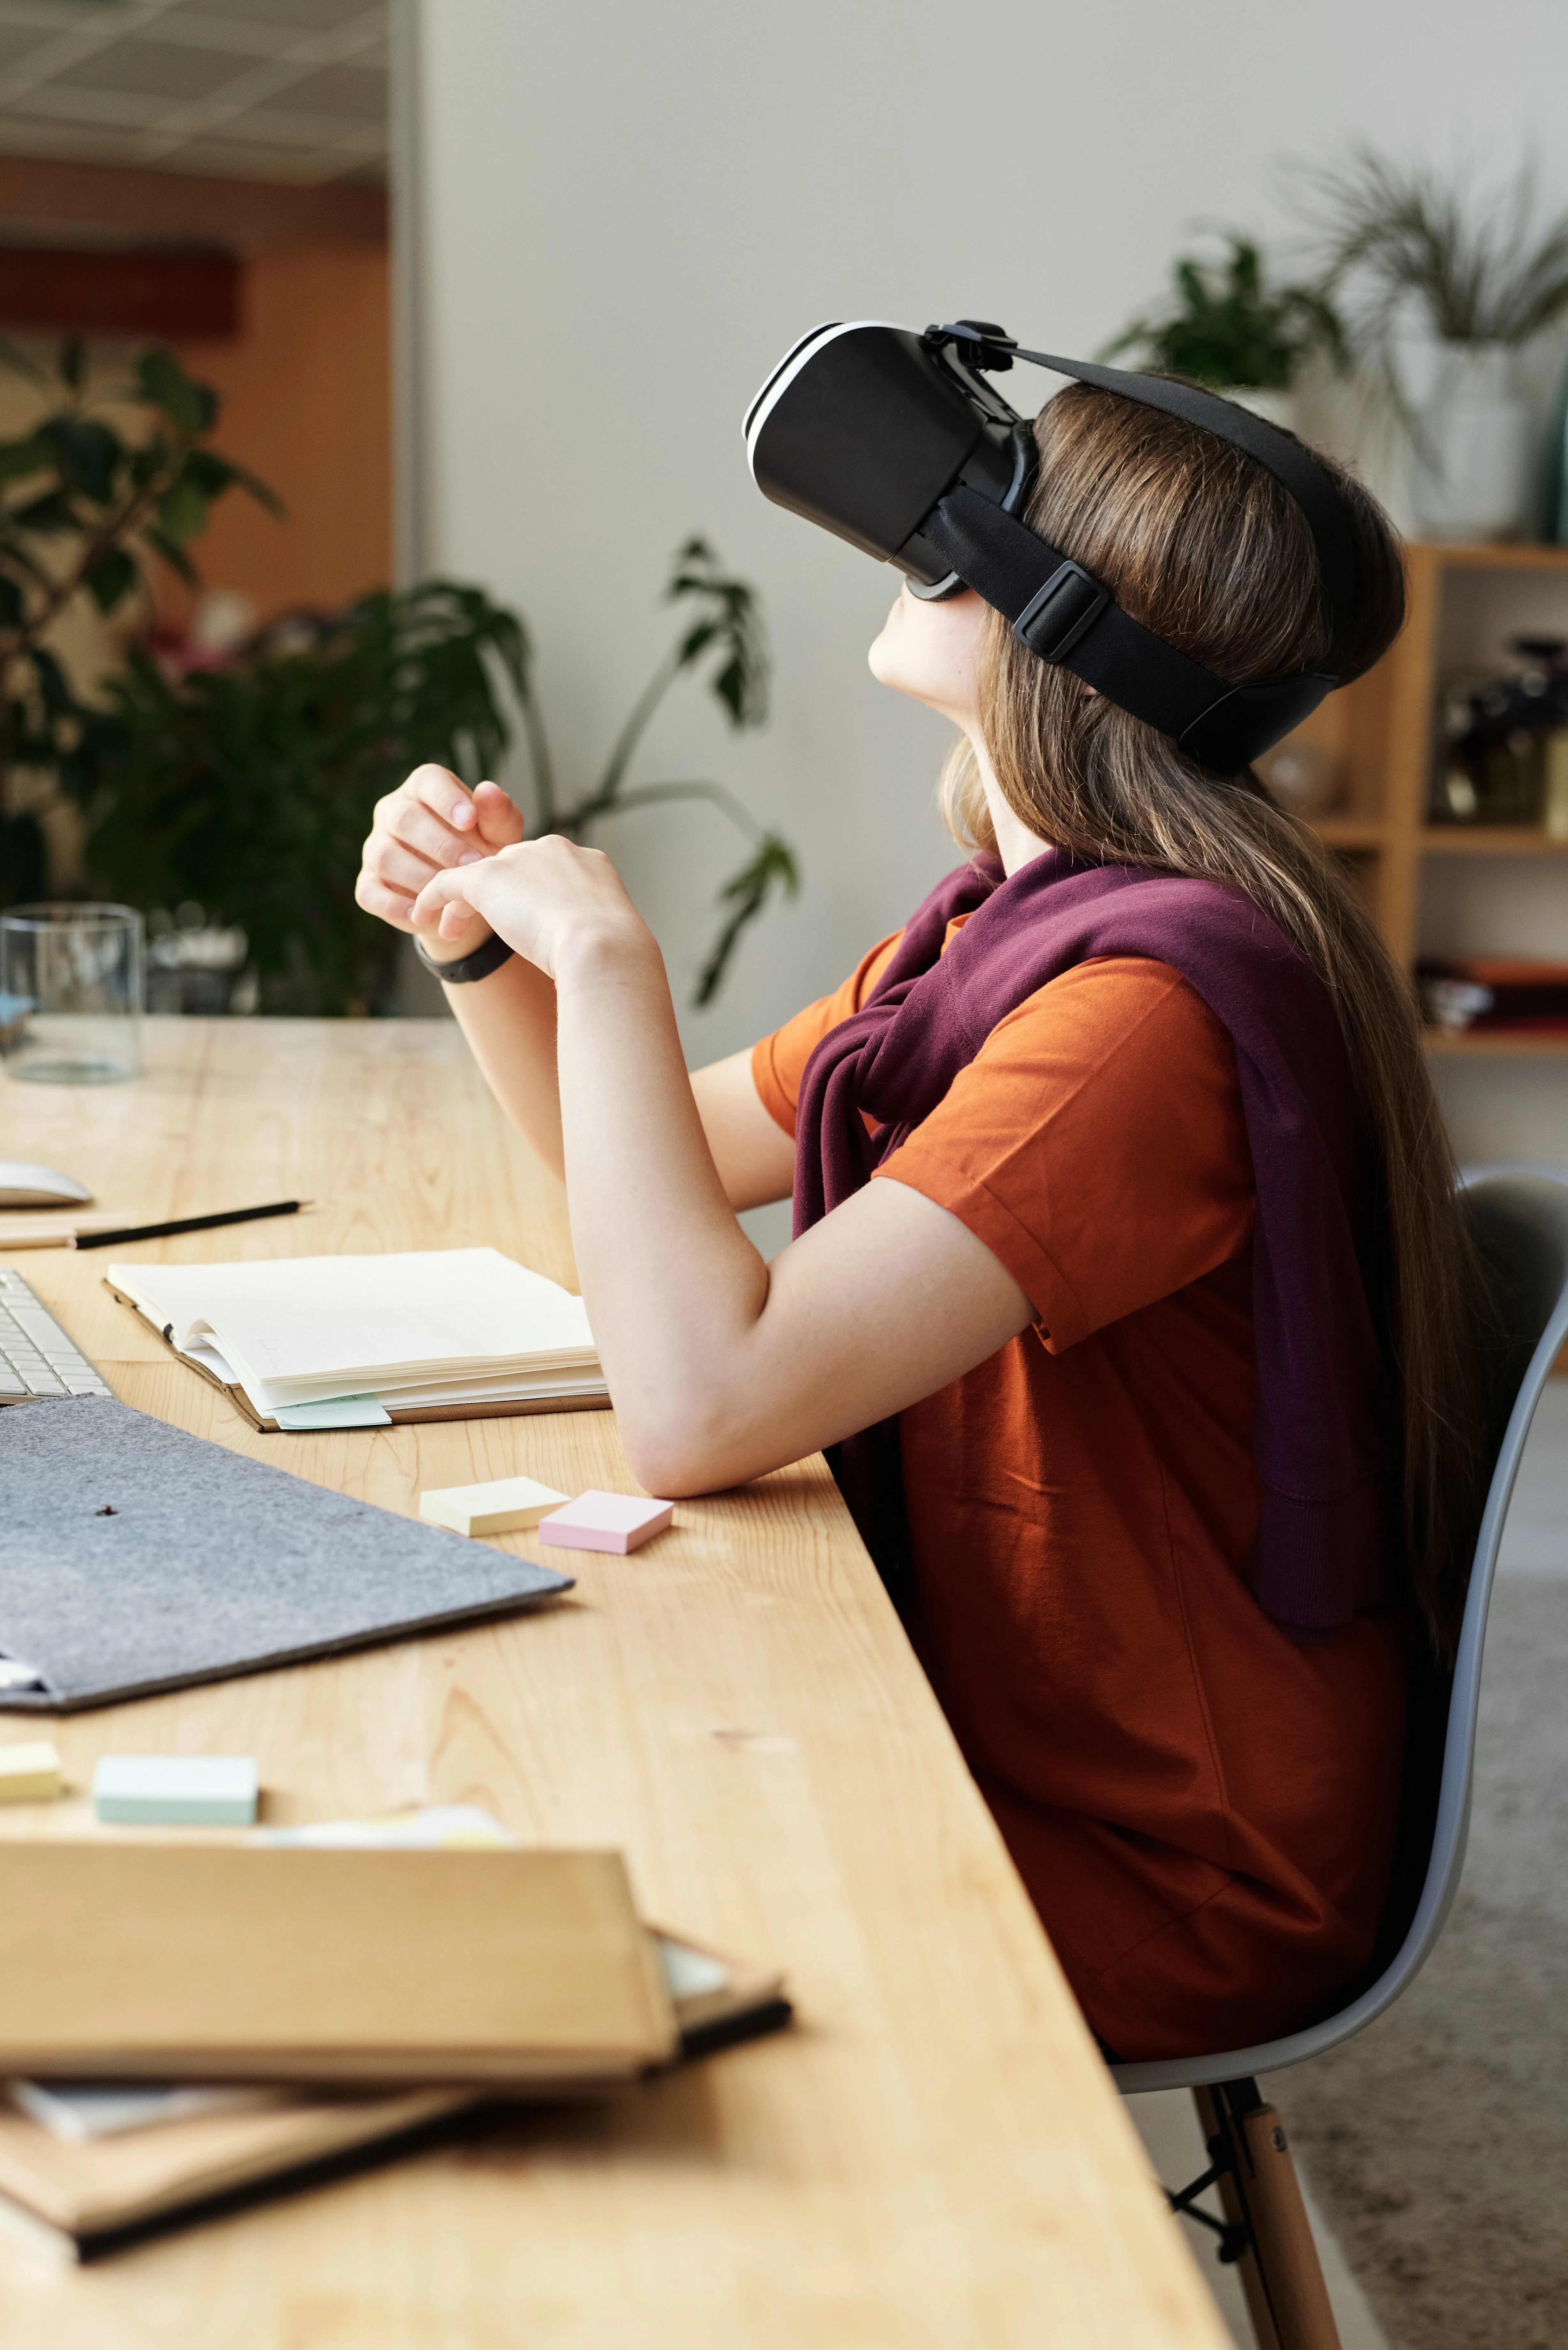 The Role of Virtual Reality in Education